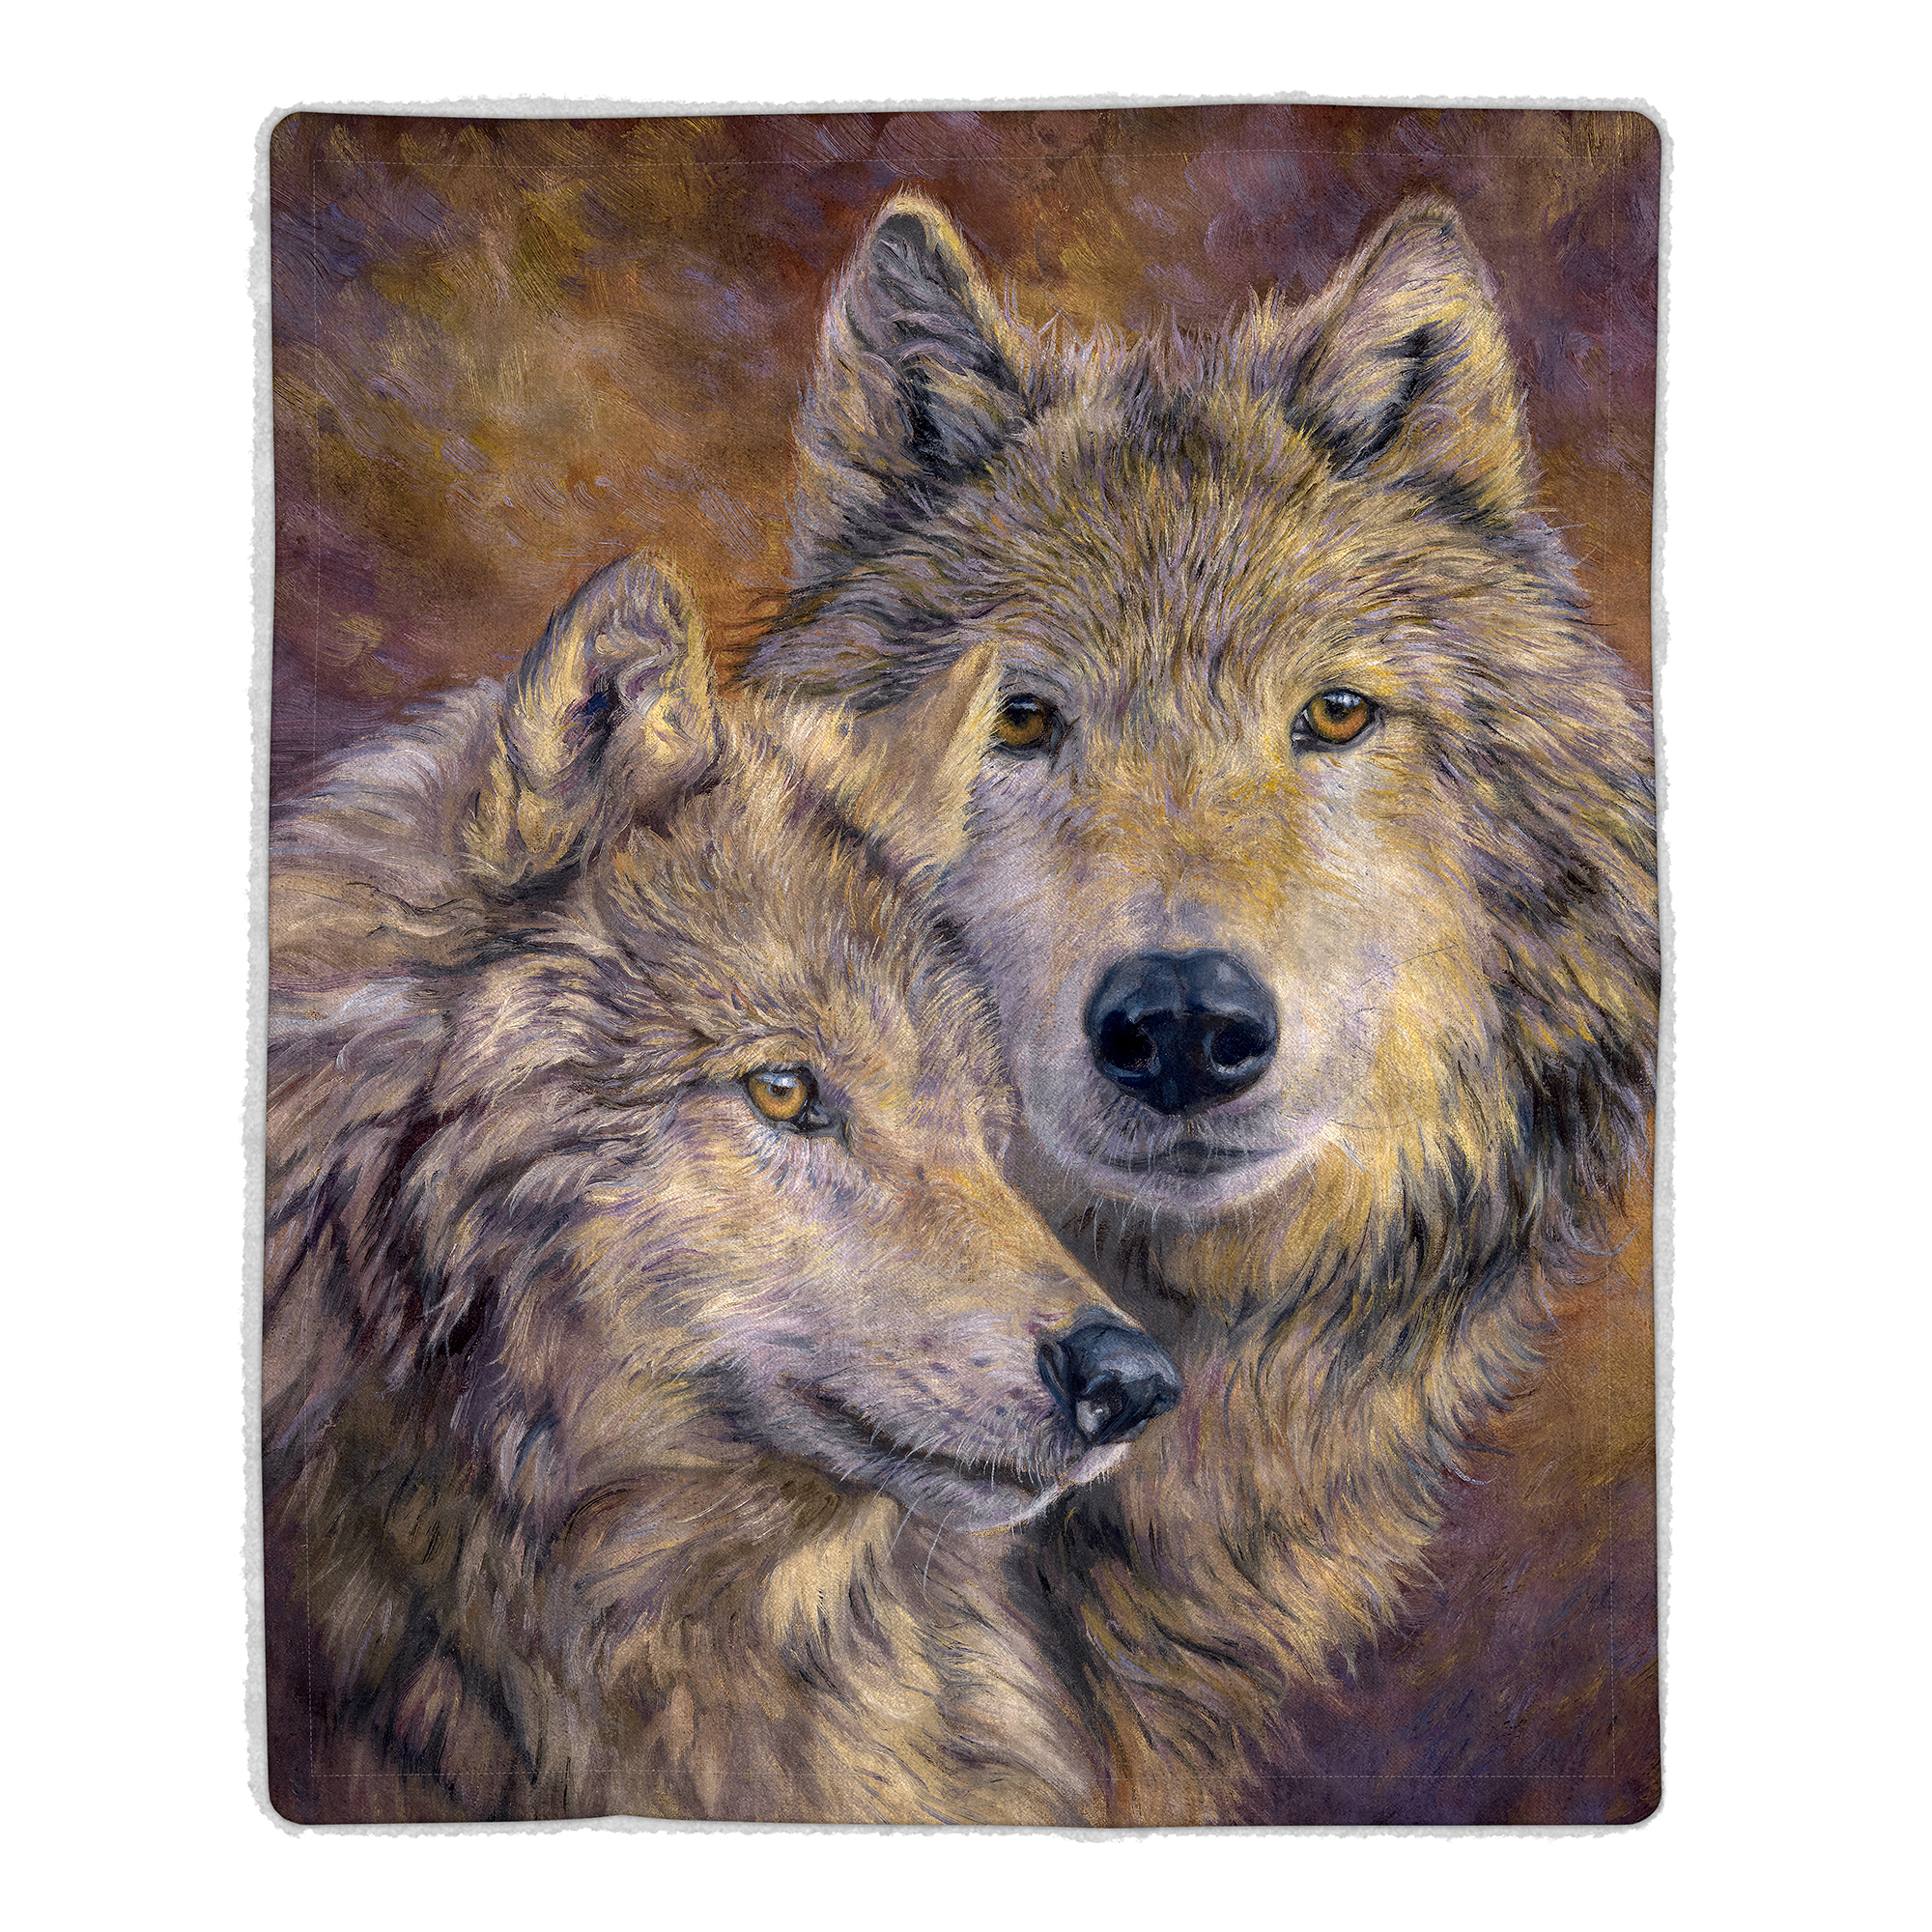 Fluffy Plush Throw Blanket 50 X 60 Inch - Wolf Print Lightweight Hypoallergenic Bed Or Couch Soft Cozy Plush